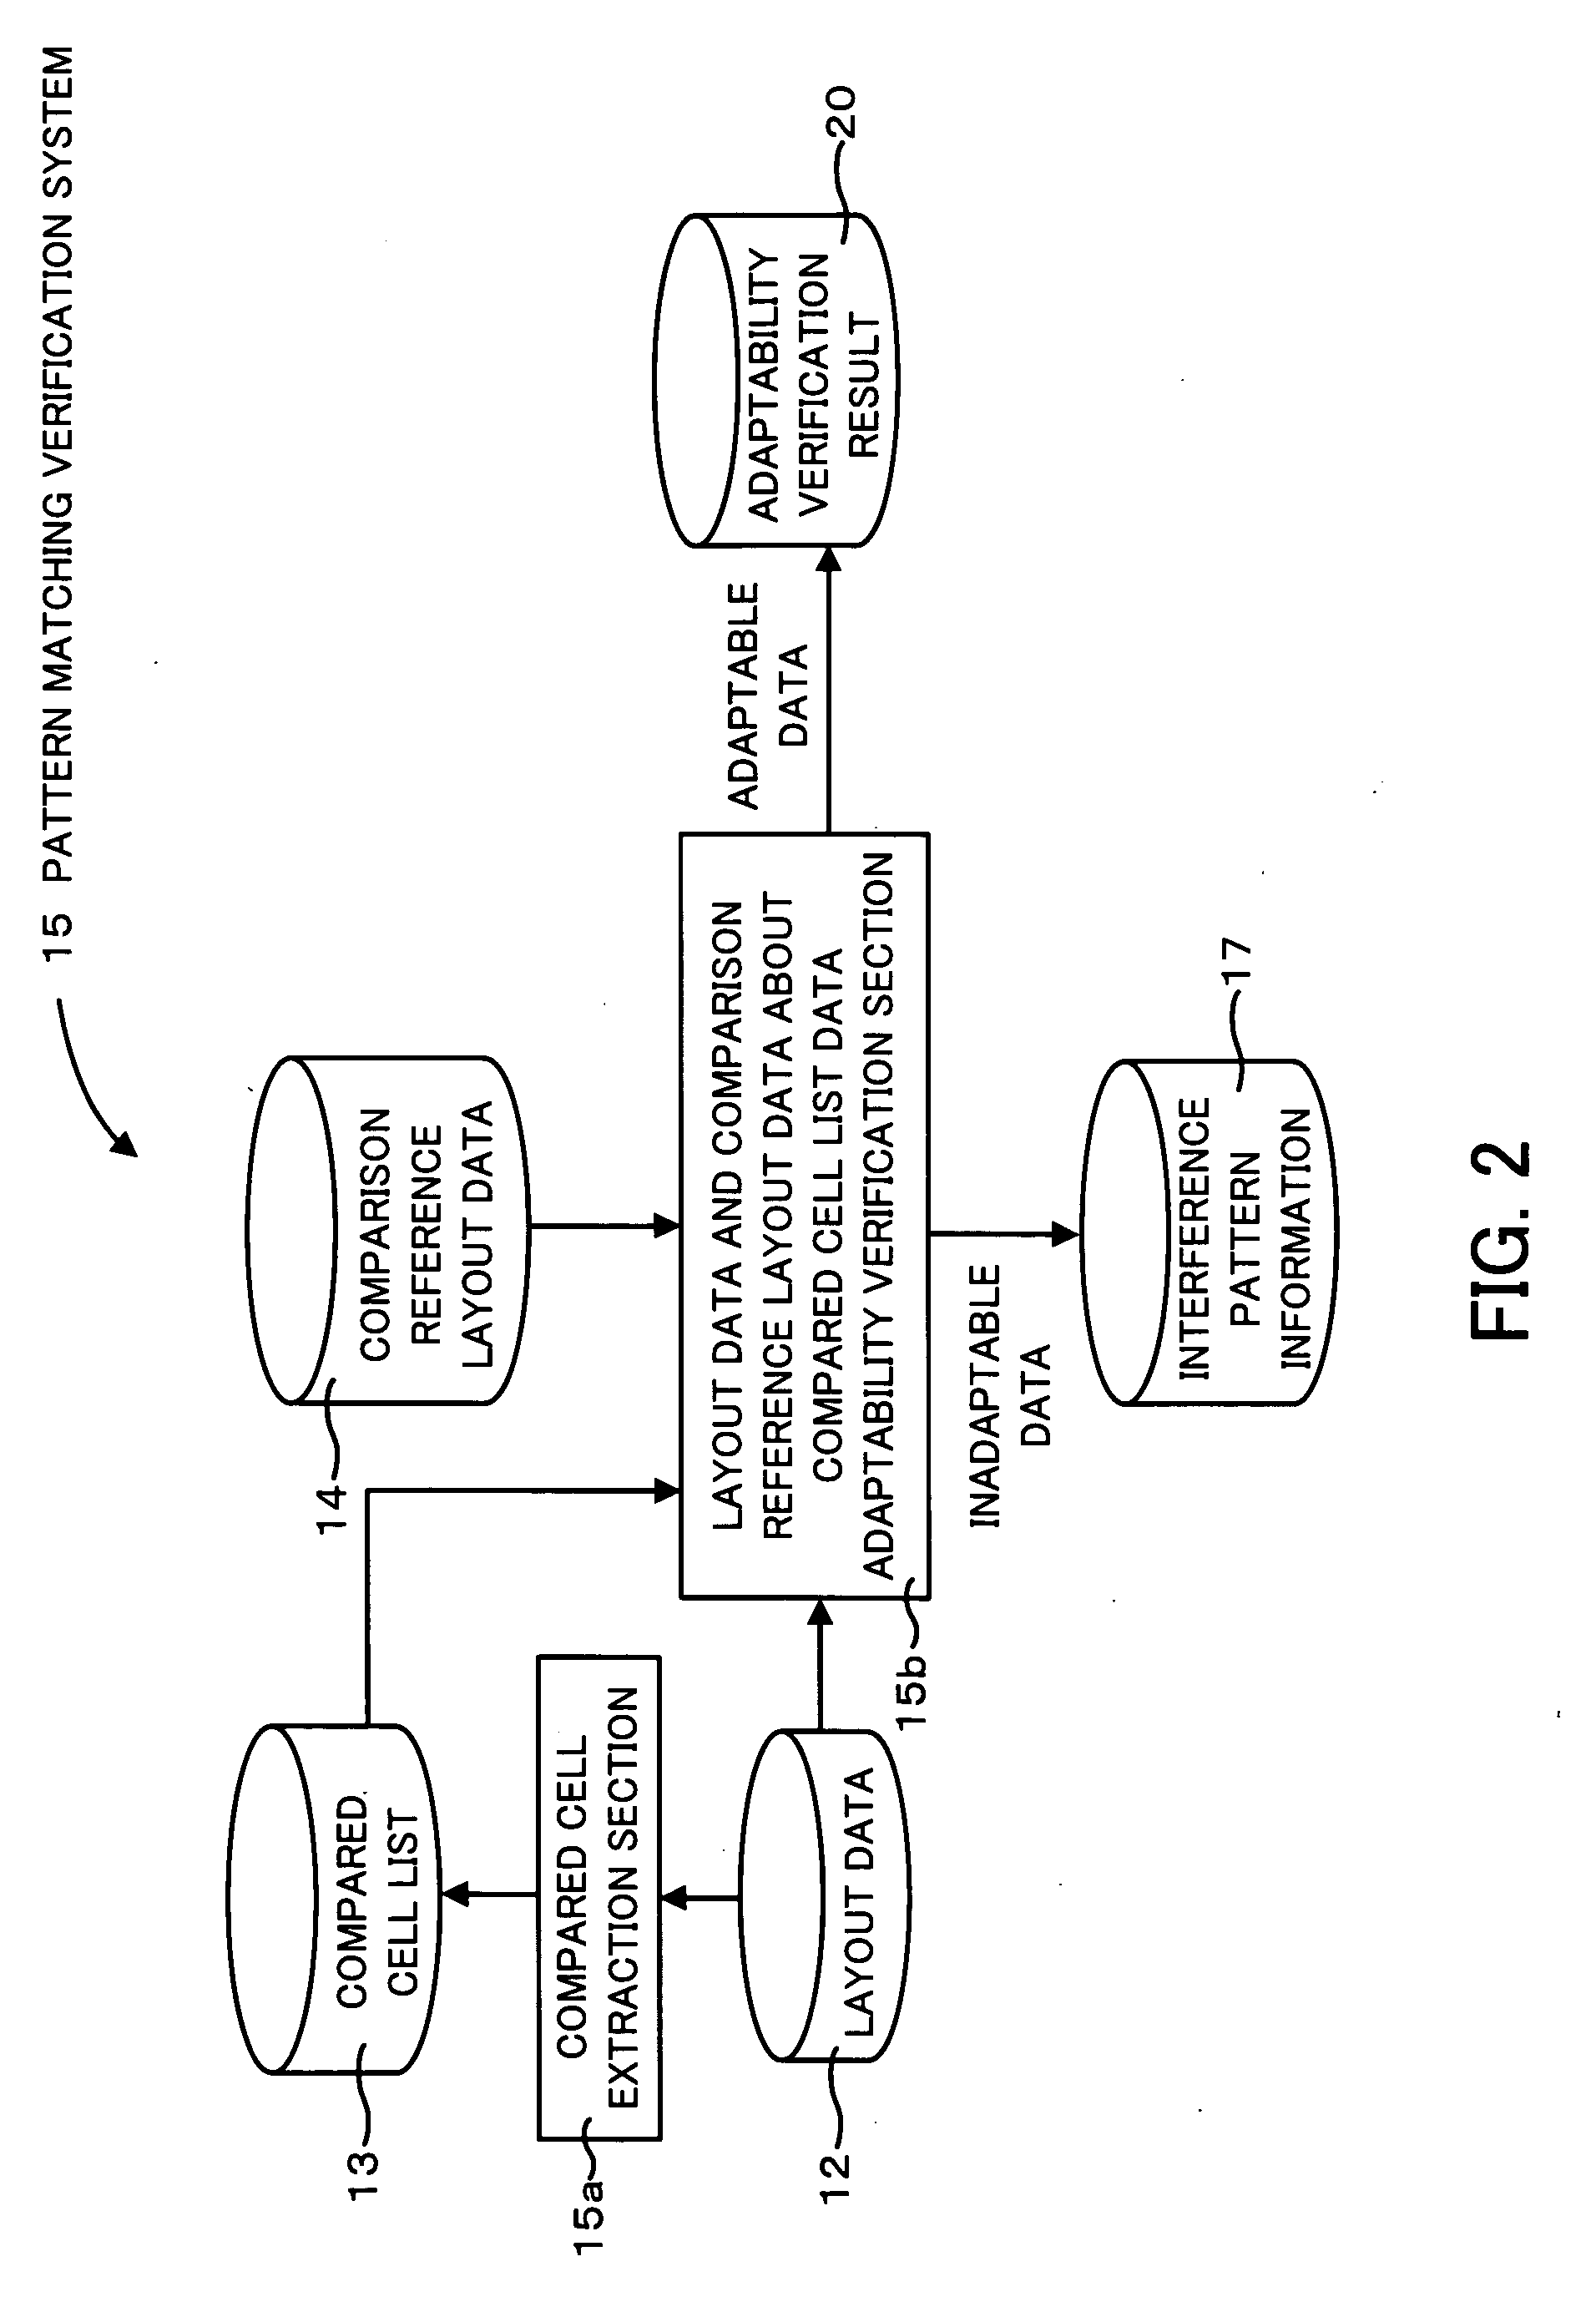 Semiconductor device verification system and semiconductor device fabrication method